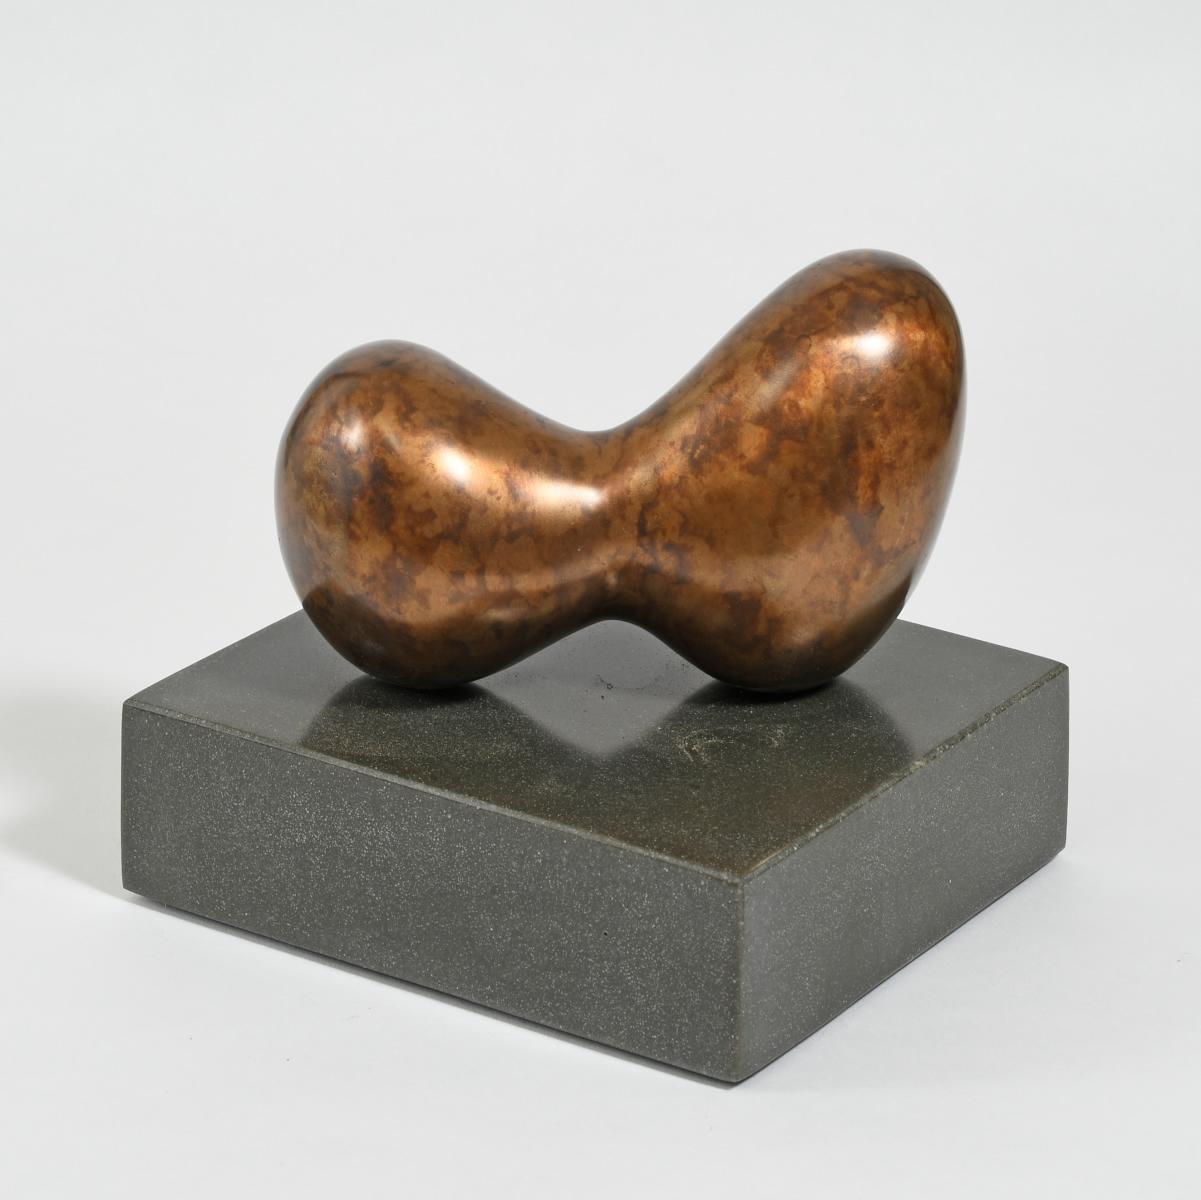 British Contemporary Sculpture by Phiip Hearsey - Riverstone - Gold Abstract Sculpture by Philip Hearsey